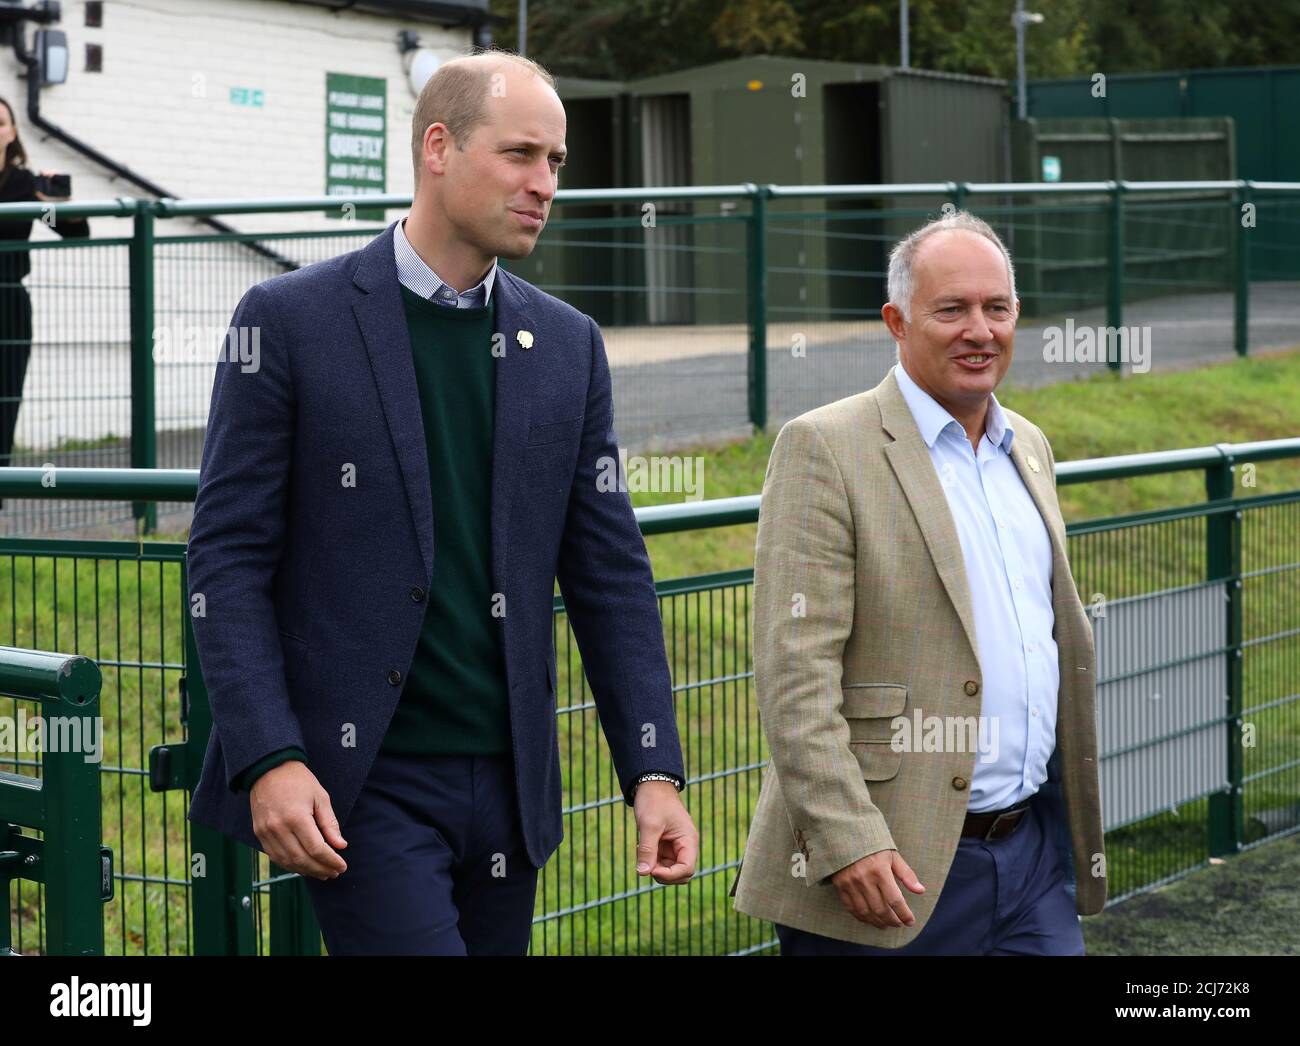 Britain's Prince William, Duke of Cambridge and Rob Morris, Co-Owner of Silver Jubilee Park and Vice President of Hendon F.C. and Edgware Town F.C., walk during a visit to Hendon FC, as part of the Heads Up mental health campaign at Hendon F.C., in London, Britain September 6, 2019. Tim P. Whitby/Pool via REUTERS Stock Photo